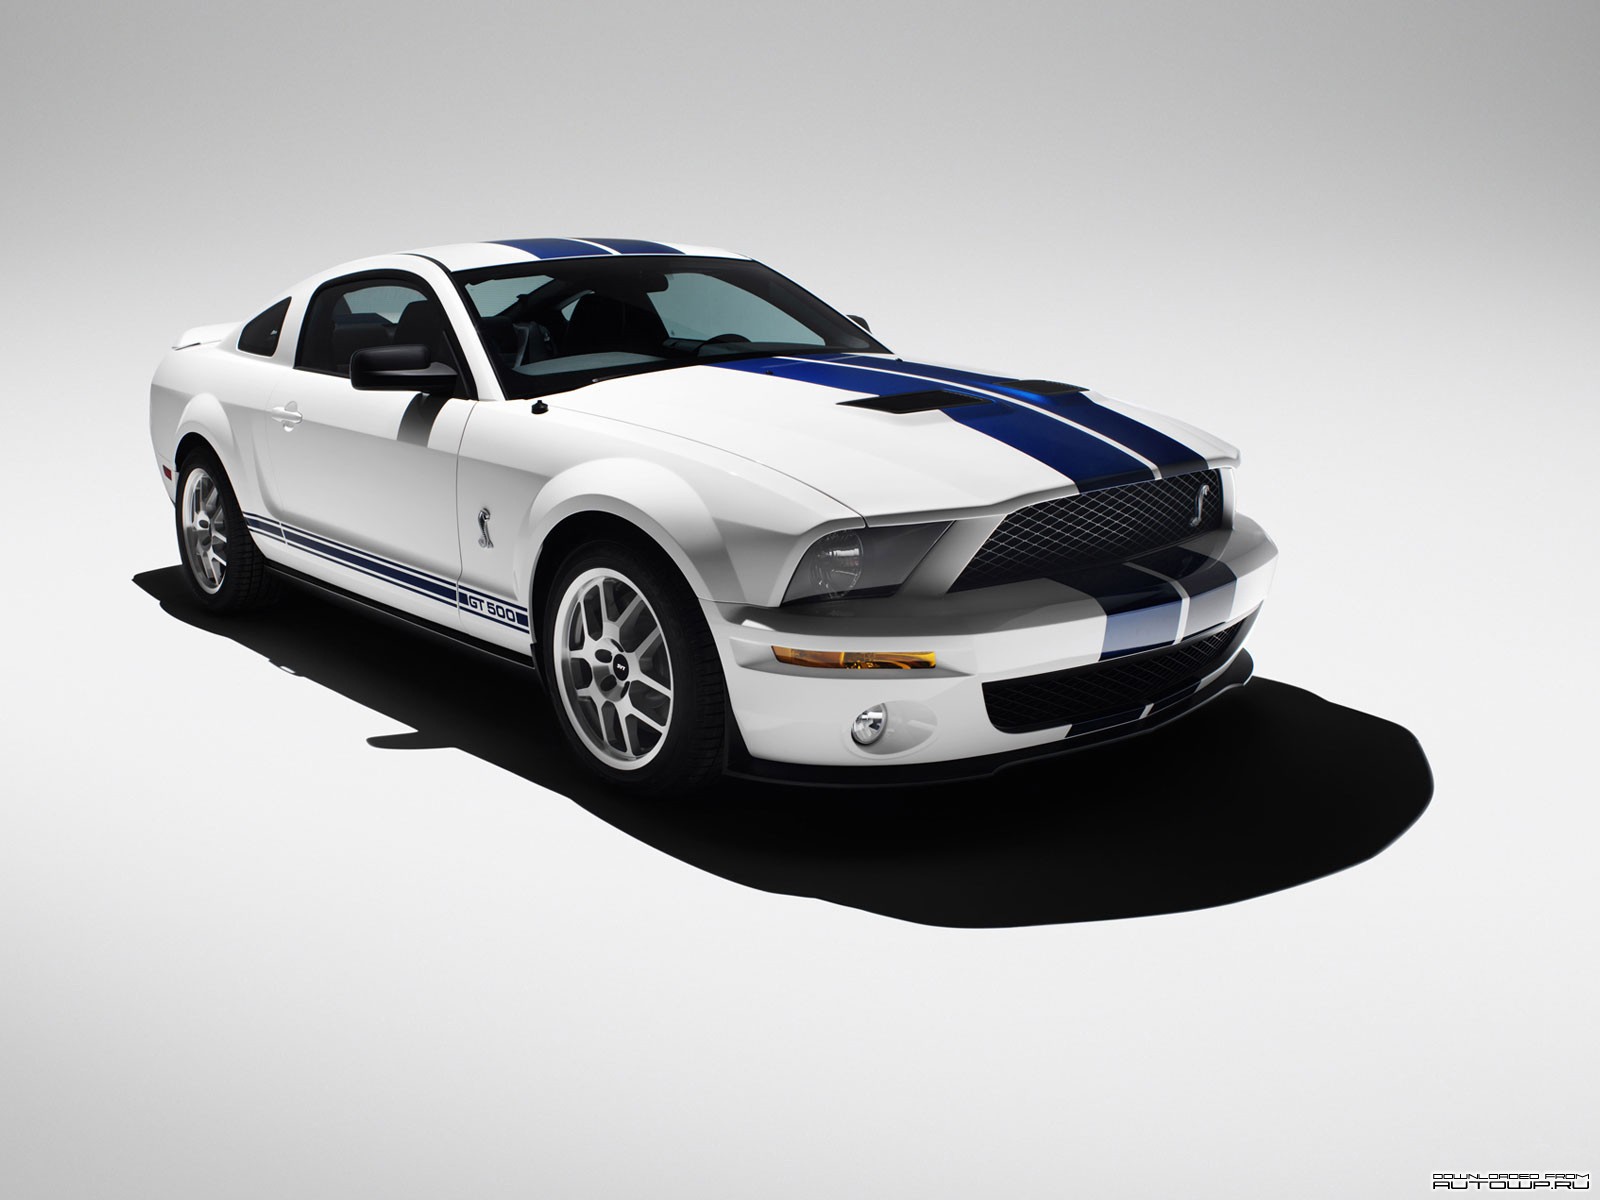 General 1600x1200 car vehicle white cars Ford Ford Mustang muscle cars American cars racing stripes Shelby